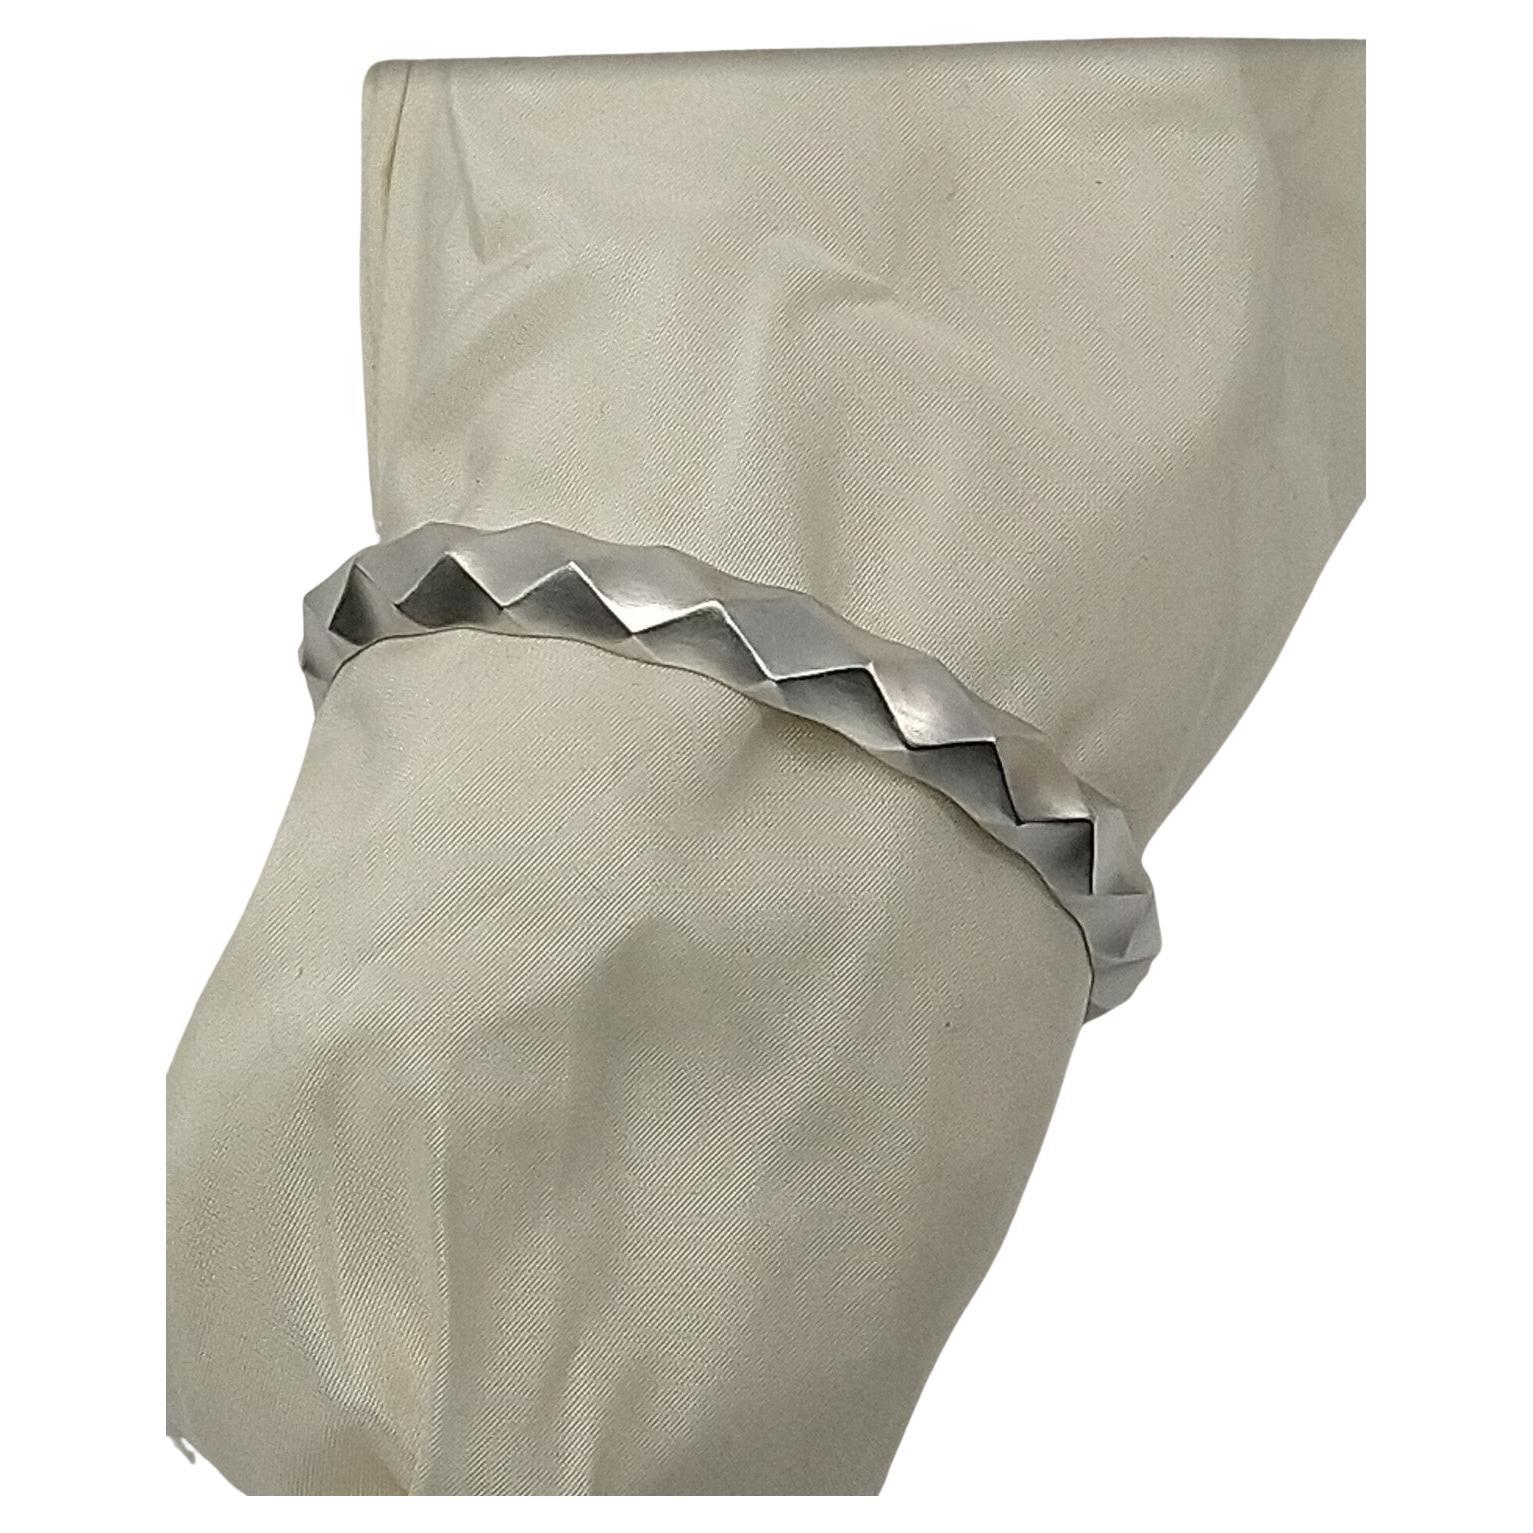 Tiffany designer, Thomas Kurilla created this cuff to exploit the rhombus shape.. 14 Karat White Gold  Concave Unisex Cuff Rhombus Bracelet.  I wear a cuff bracelet for years.  My cuff is 5.4mm or shy 1/4 inch wide. I like the slim simplicity of the